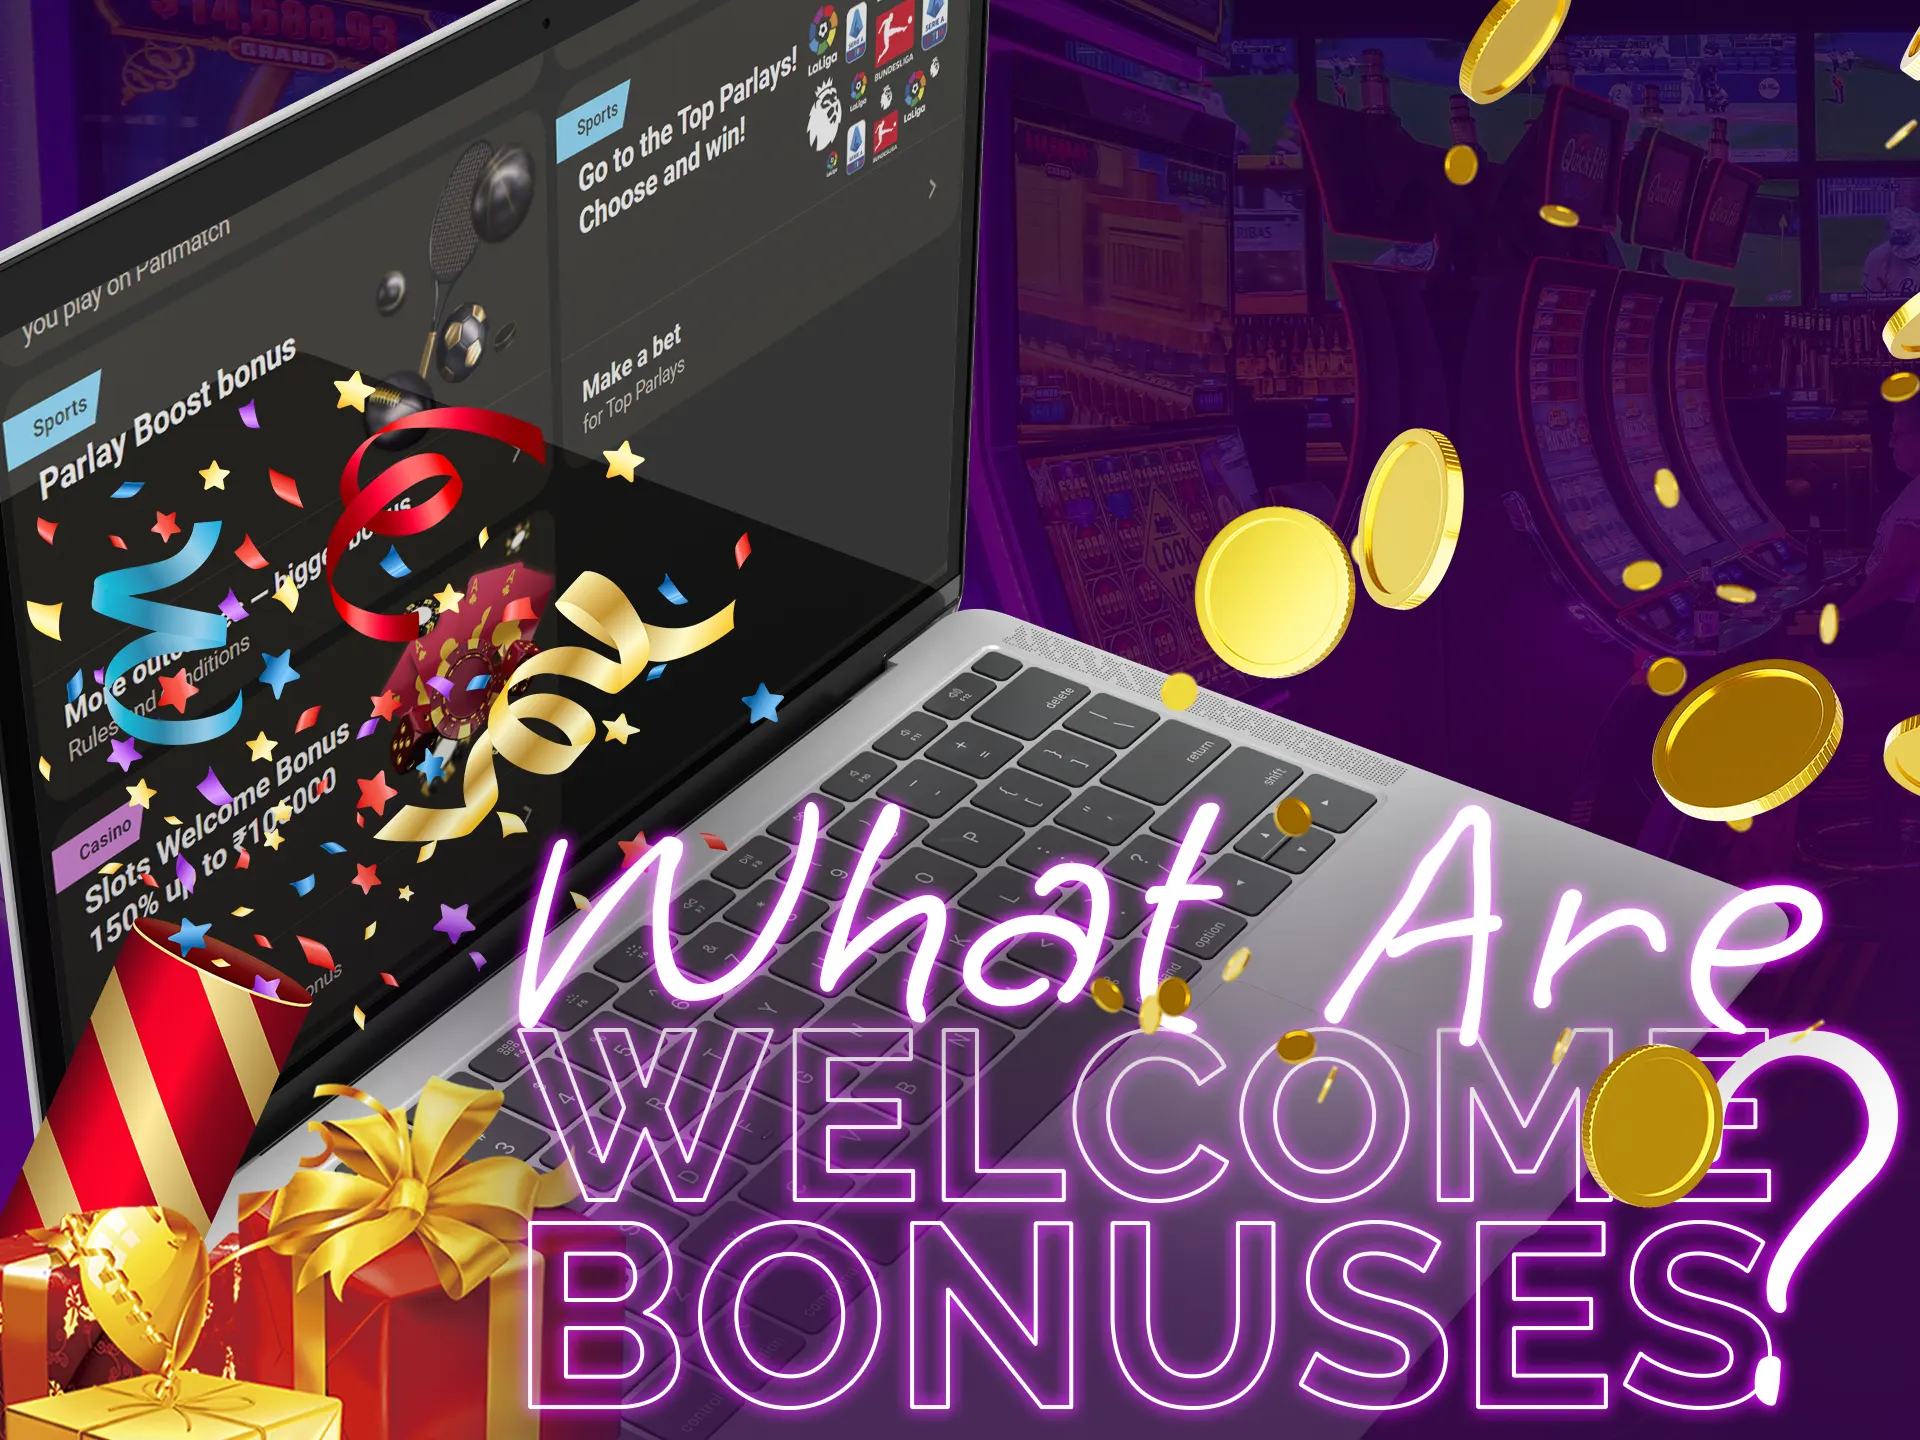 Learn what welcome bonuses are.